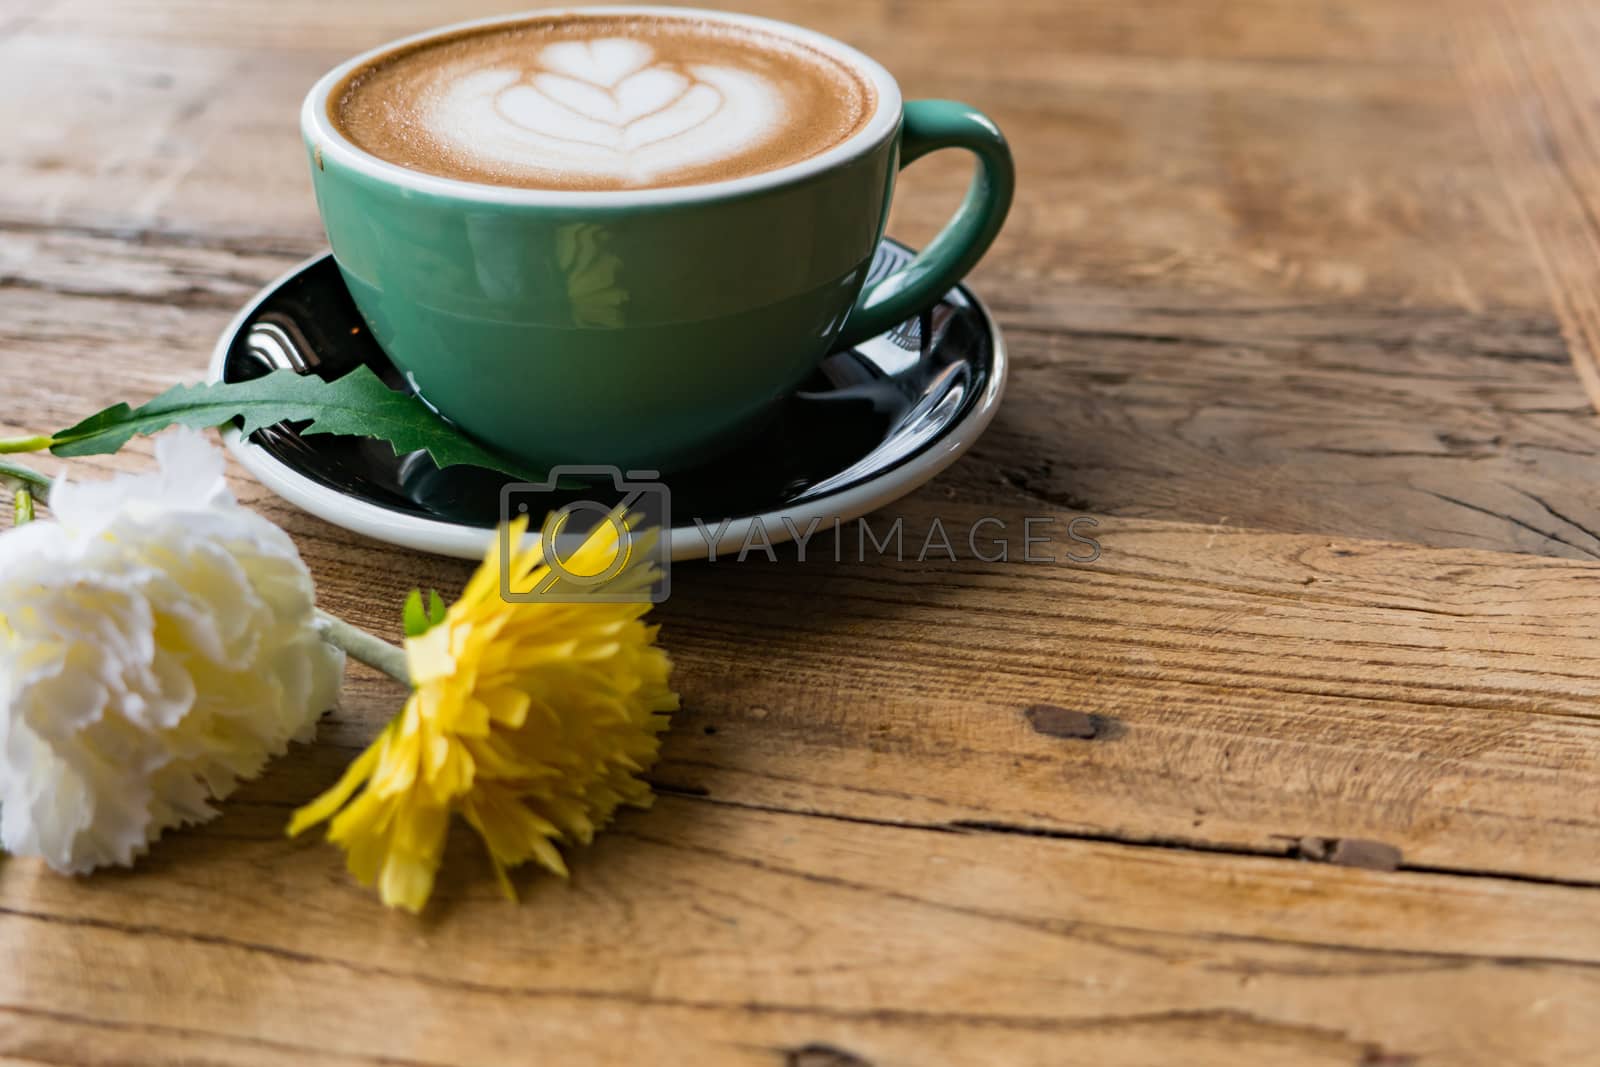 Royalty free image of Hot mocha coffee or capuchino with heart pattern and yellow flow by psodaz